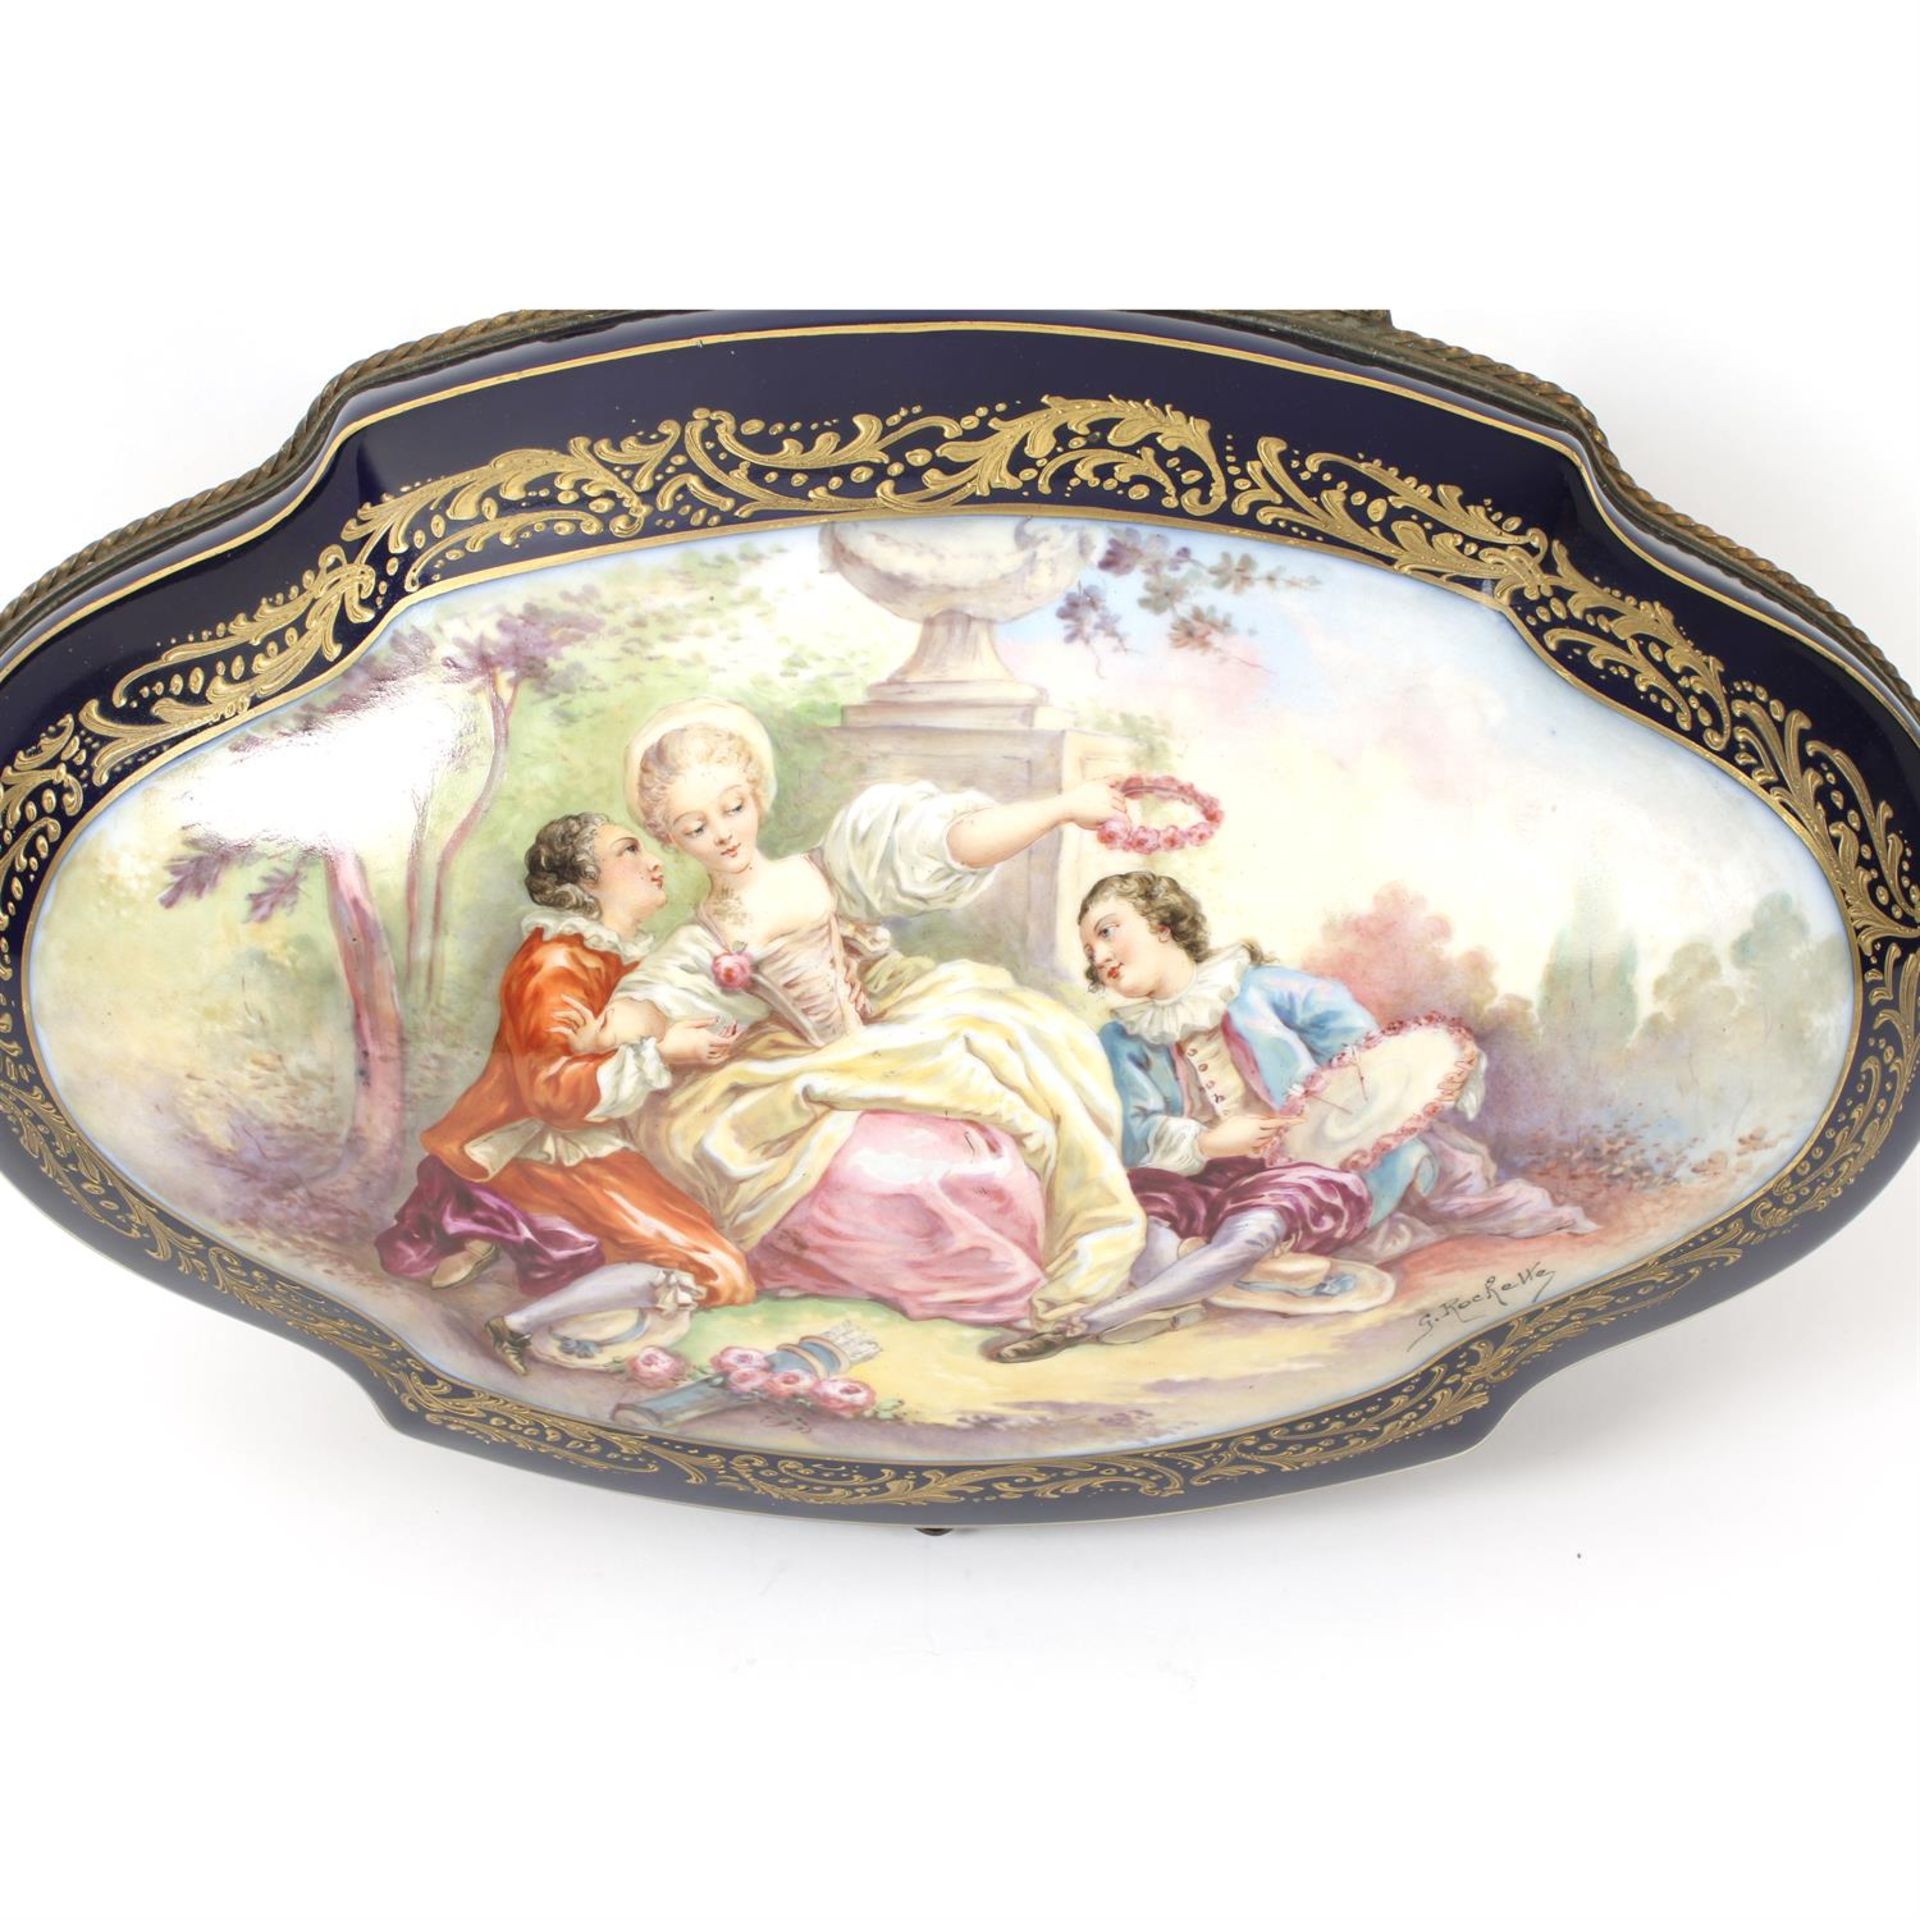 Sevres table casket with Watteau panels, signed G. Rochelle - Image 5 of 11